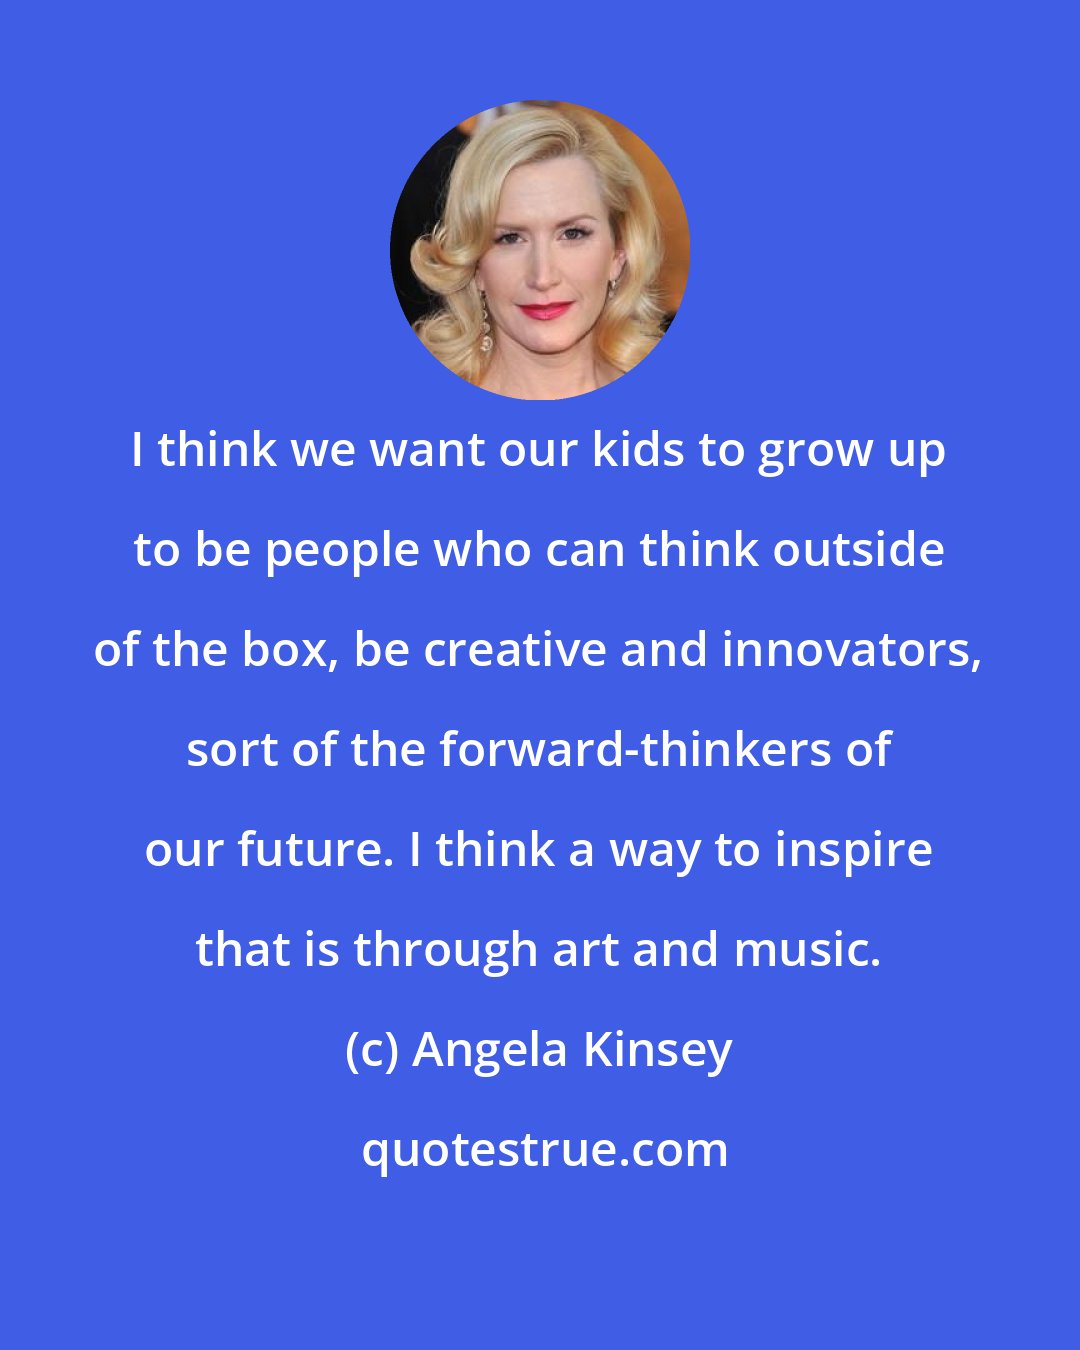 Angela Kinsey: I think we want our kids to grow up to be people who can think outside of the box, be creative and innovators, sort of the forward-thinkers of our future. I think a way to inspire that is through art and music.